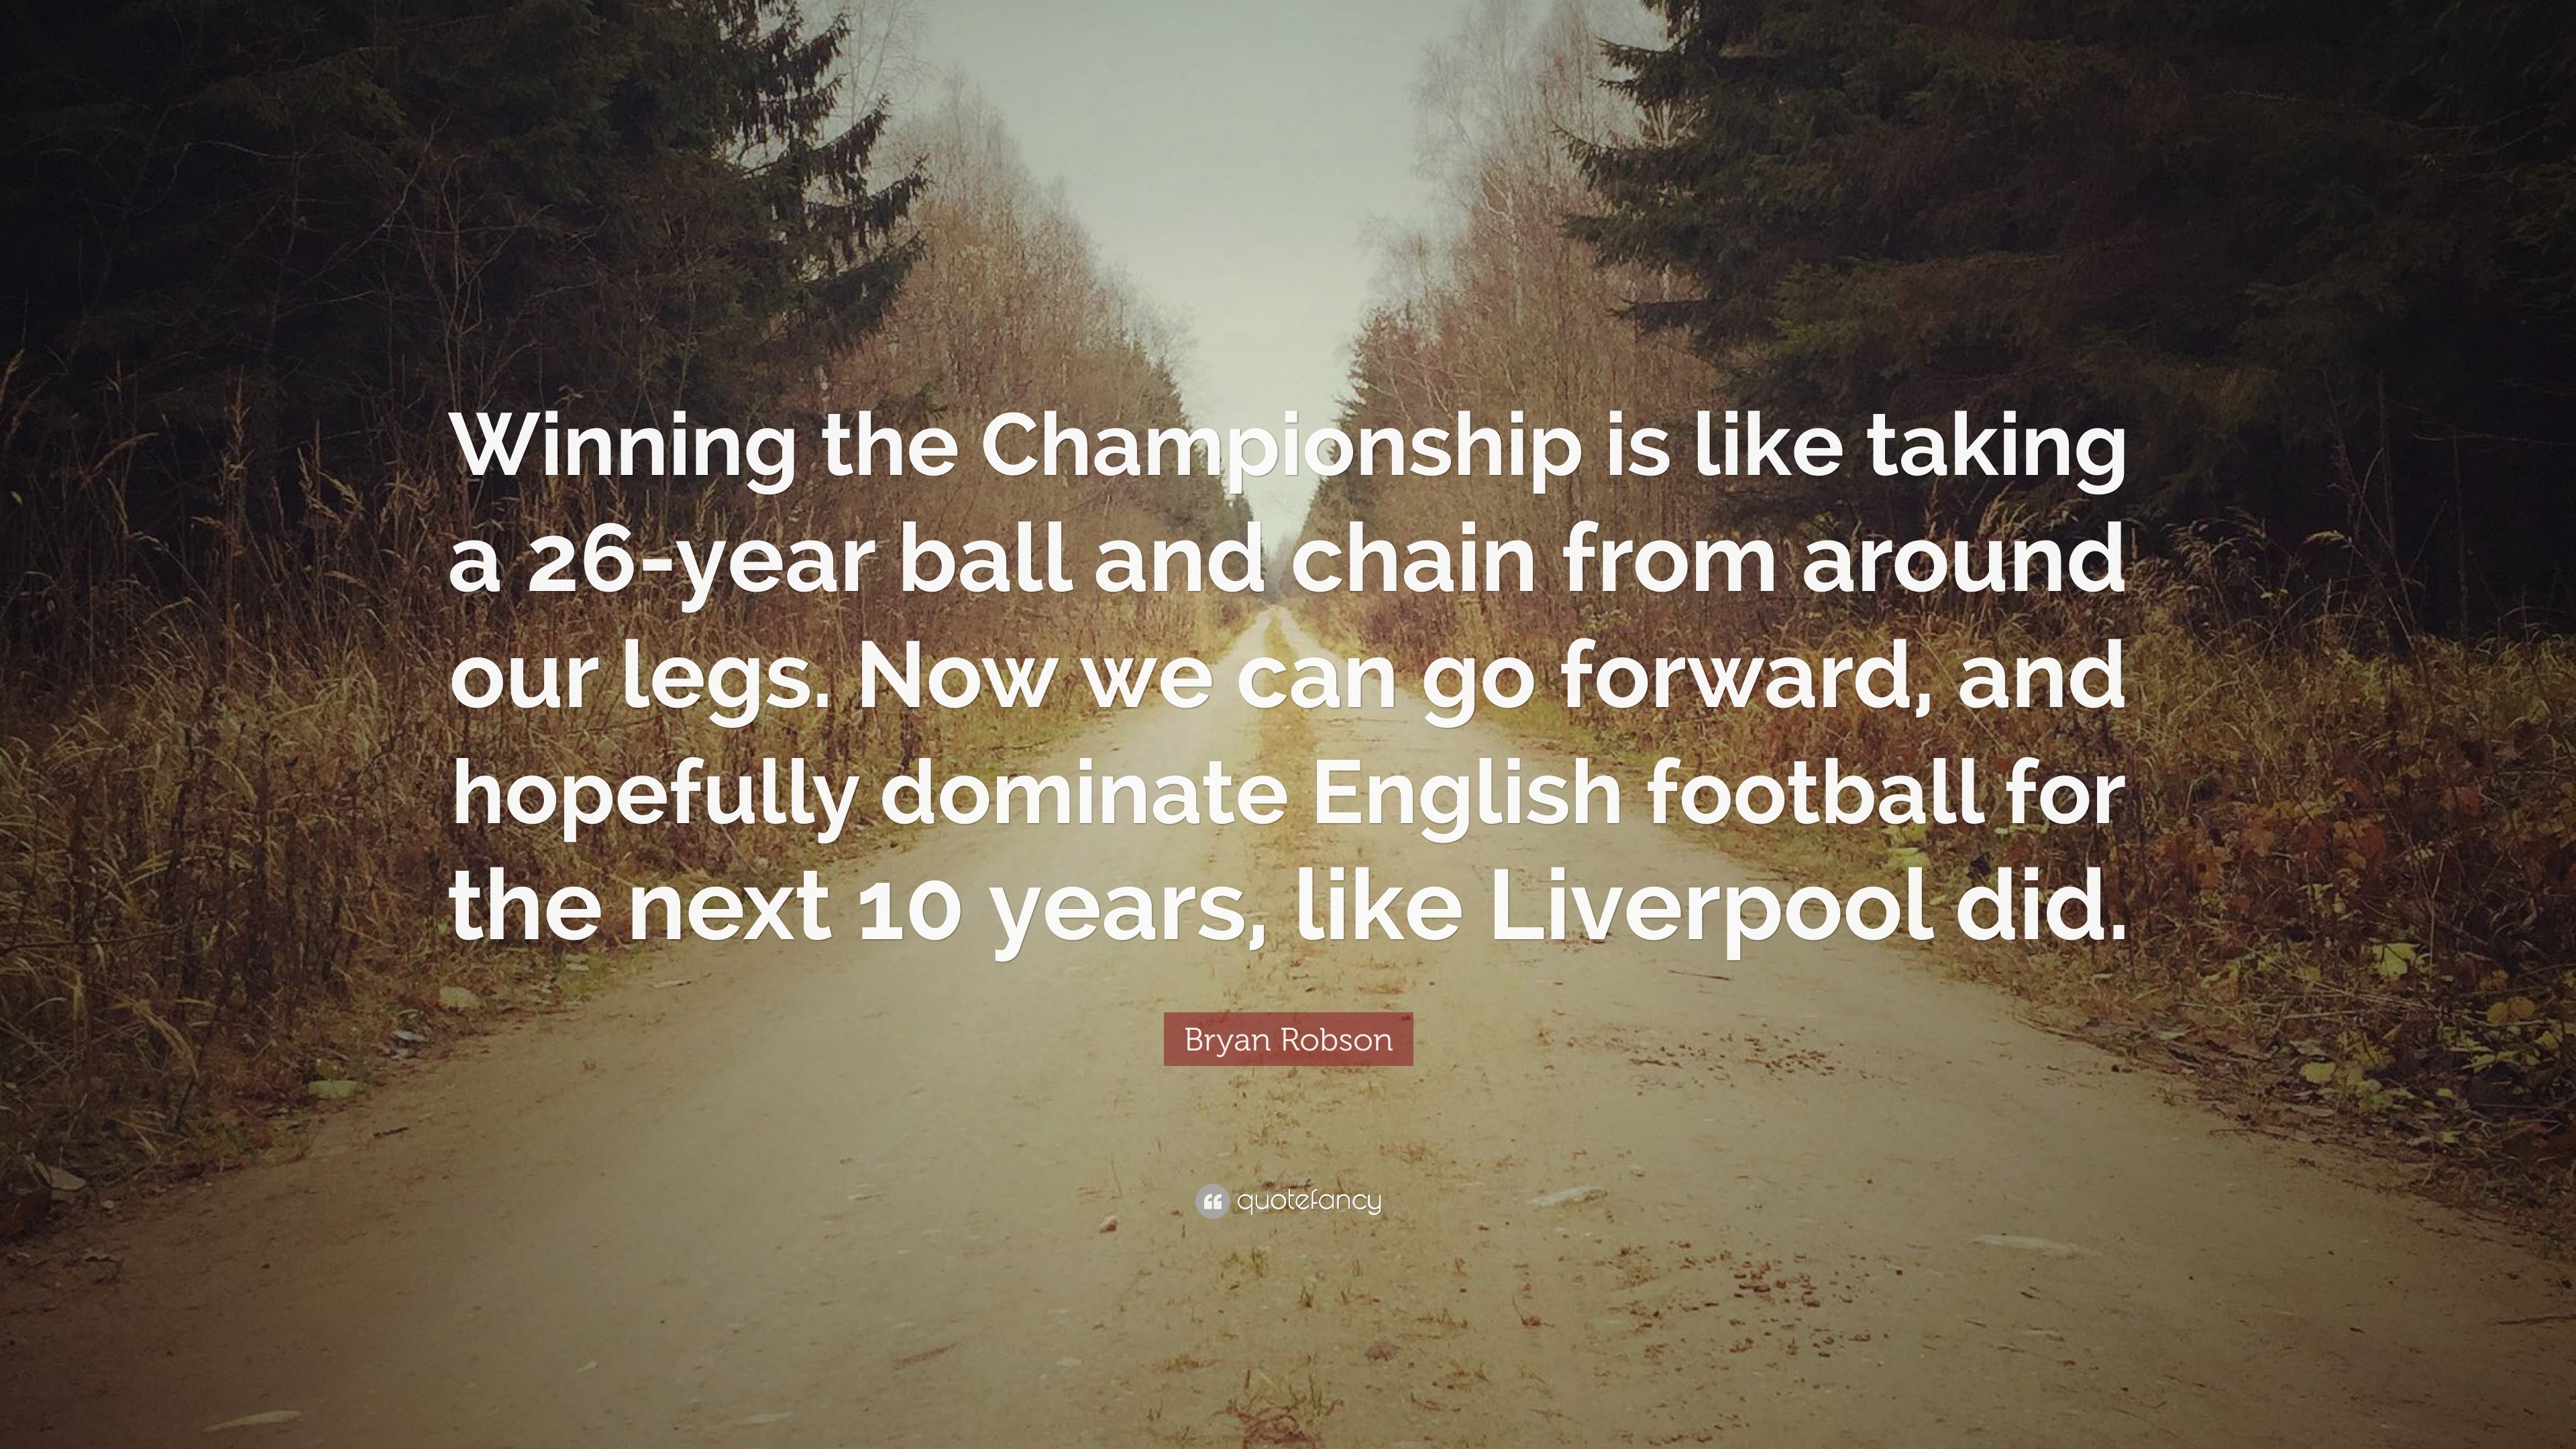 Bryan Robson Quote: “Winning the Championship is like taking a 26-year ...